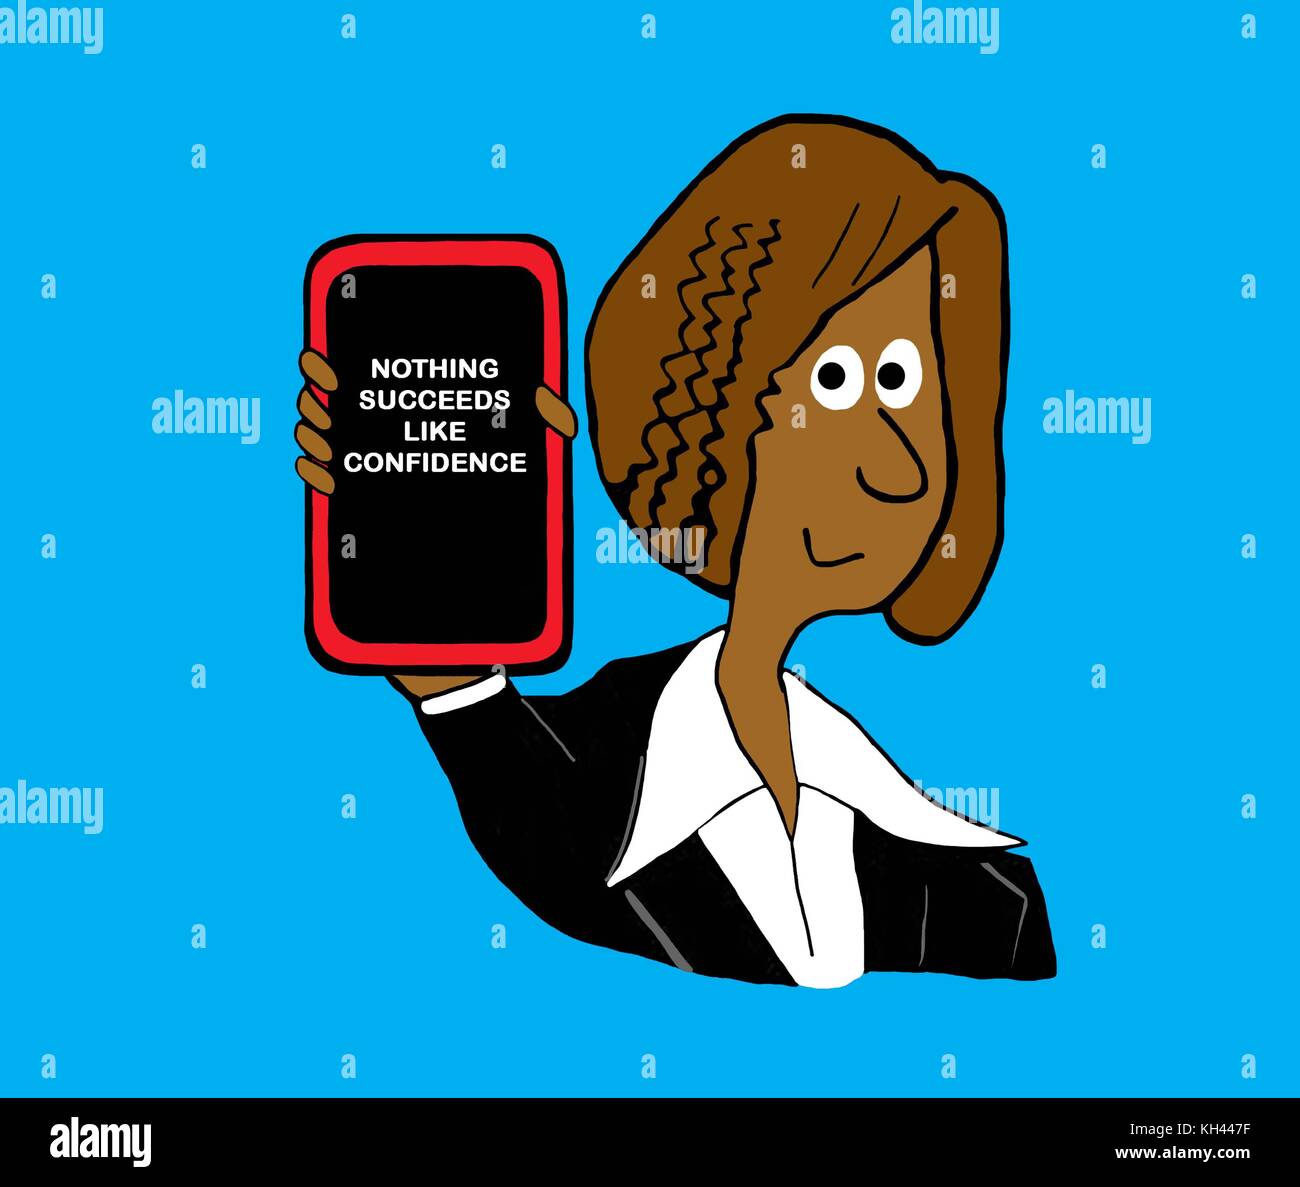 Business cartoon illustration showing a smiling, black business woman who believes 'nothing succeeds like confidence'. Stock Photo